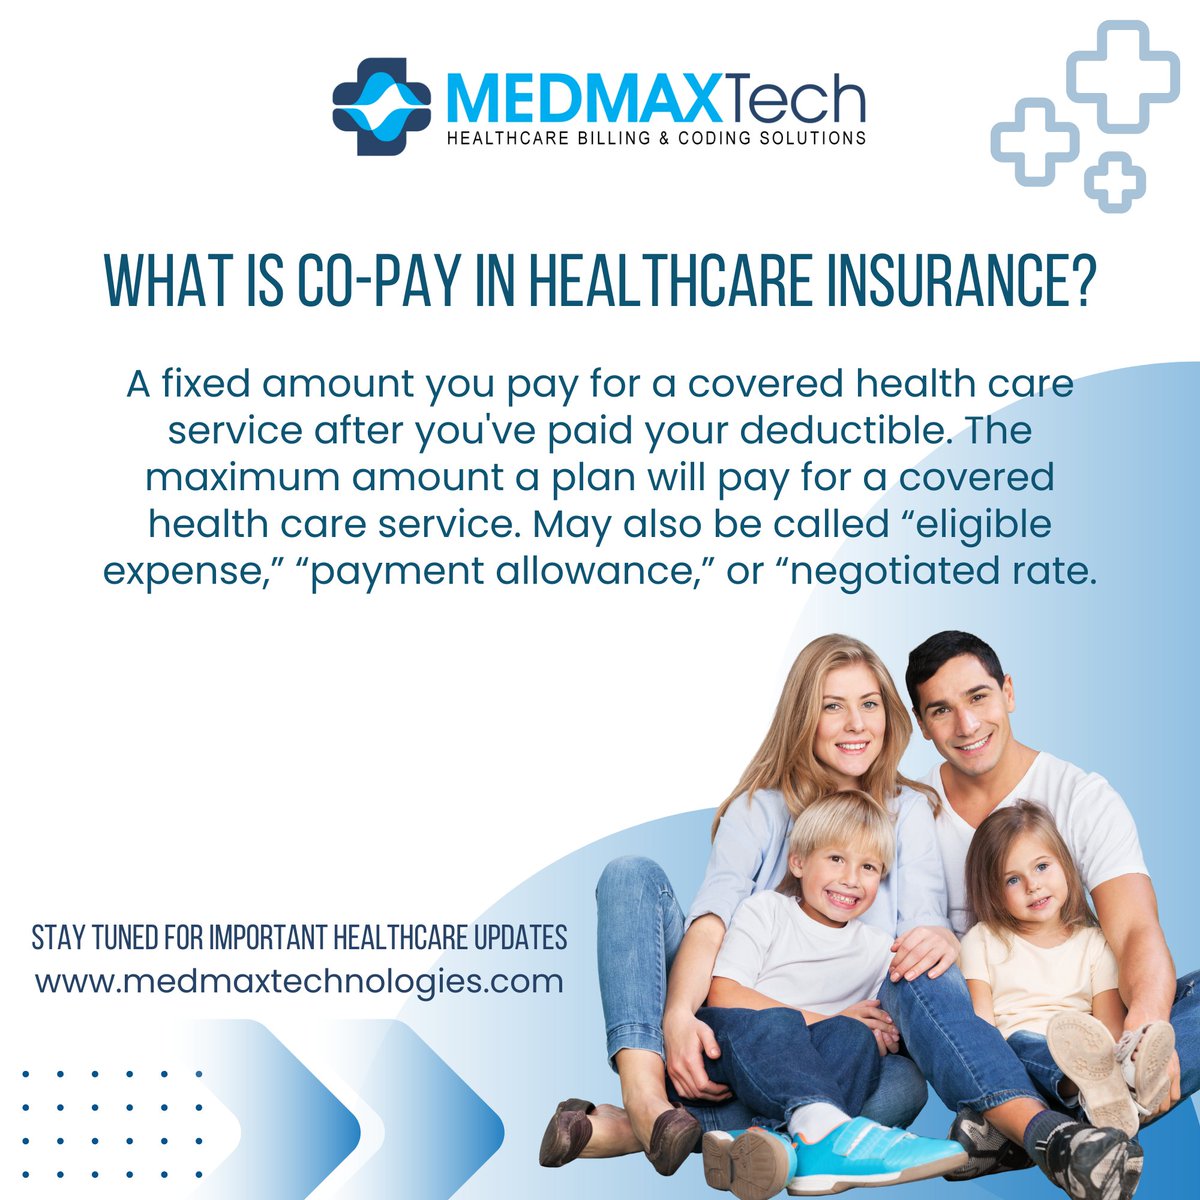 Confused about co-pays in healthcare insurance?  Let us break it down for you! A copay is a fixed amount you pay for a covered healthcare service after your deductible has been met.  Stay ahead of the game with important healthcare updates every day!
#CoPay #HealthcareInsurance